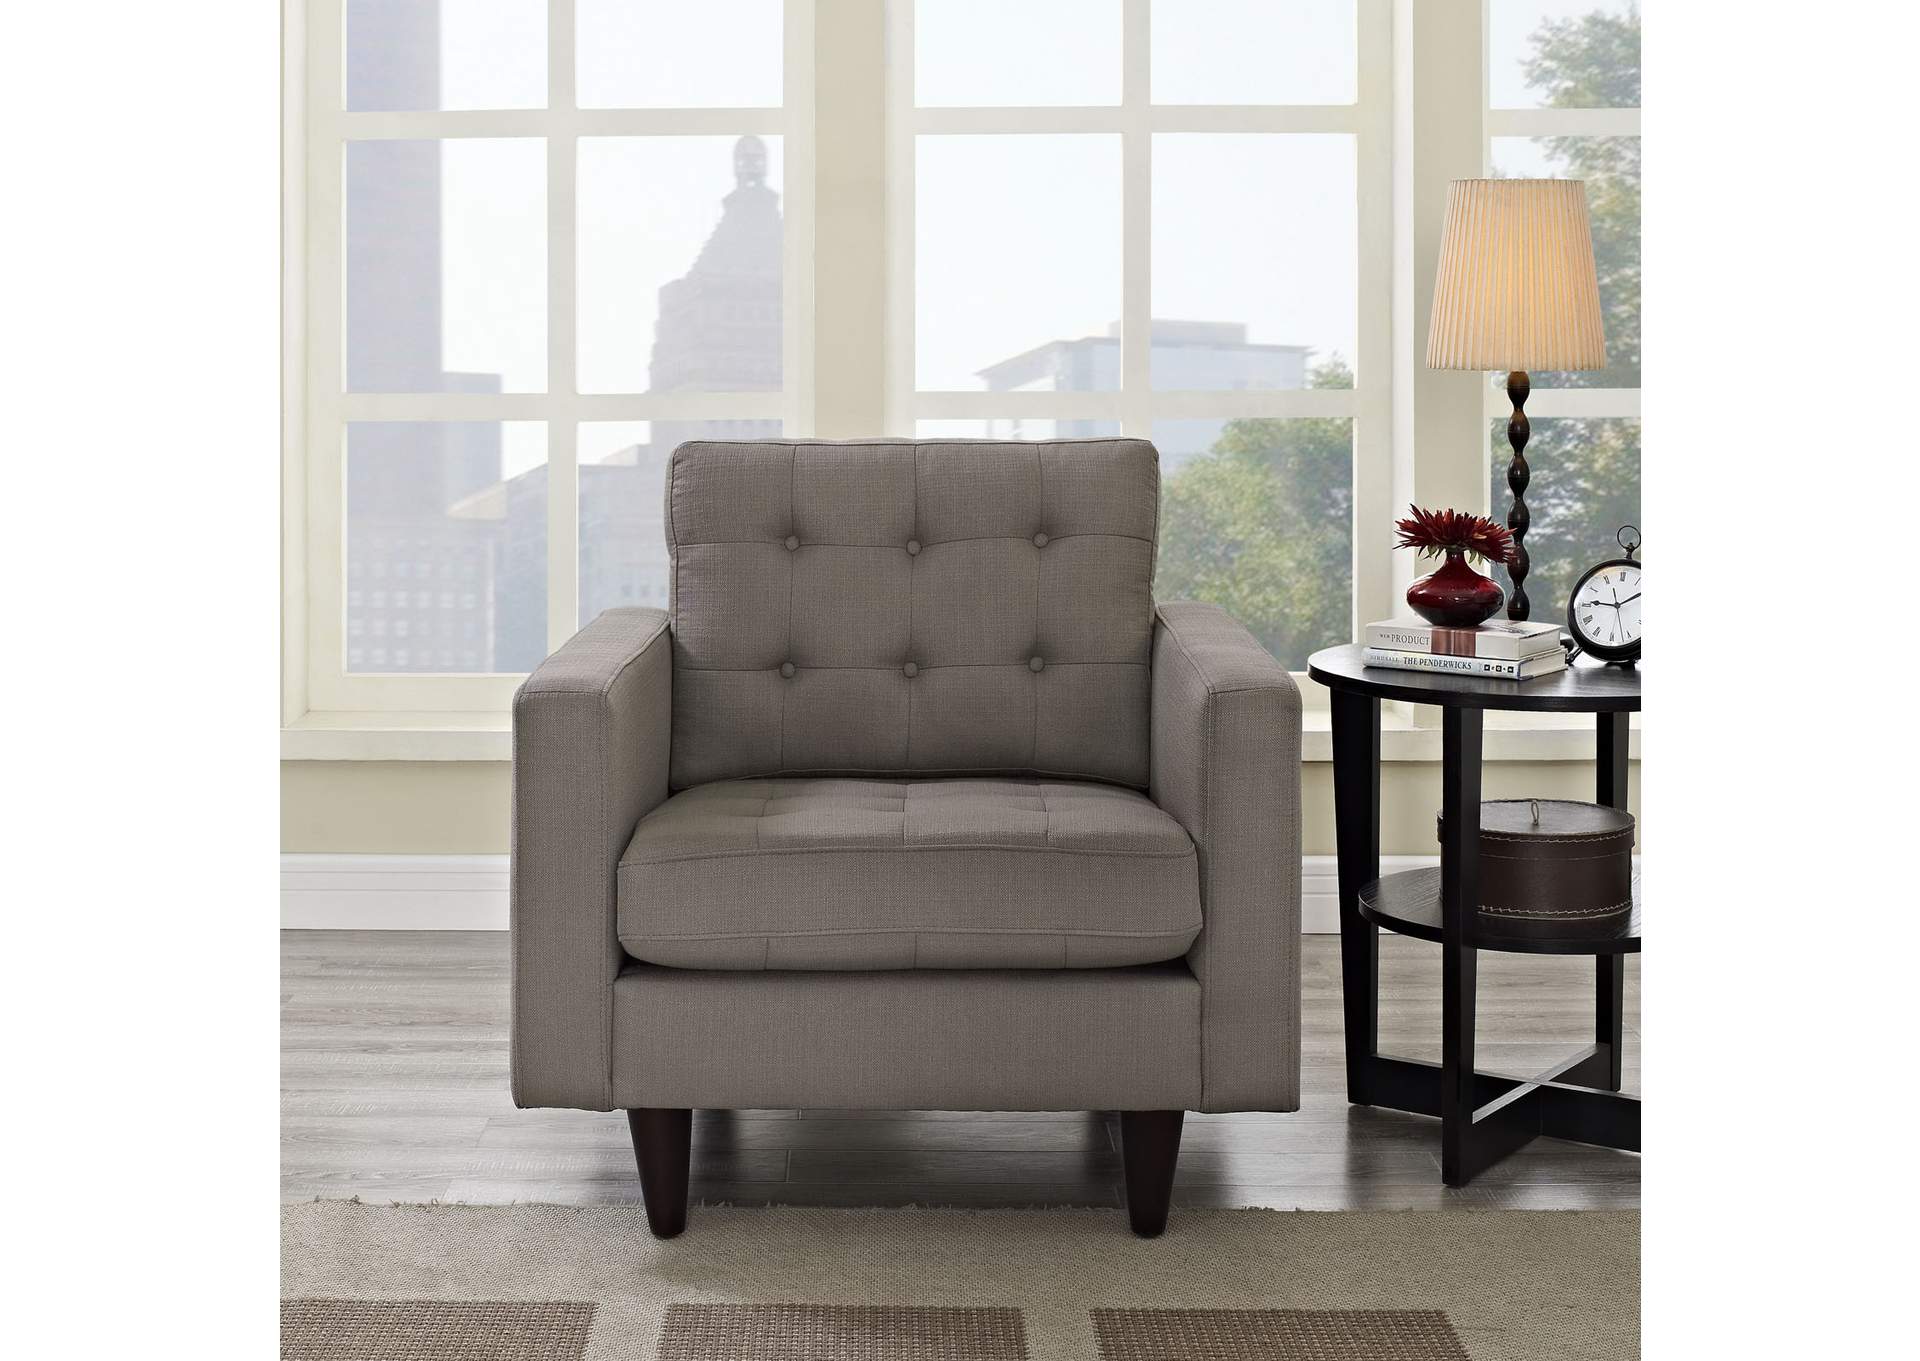 Granite Empress Upholstered Fabric Arm Chair,Modway